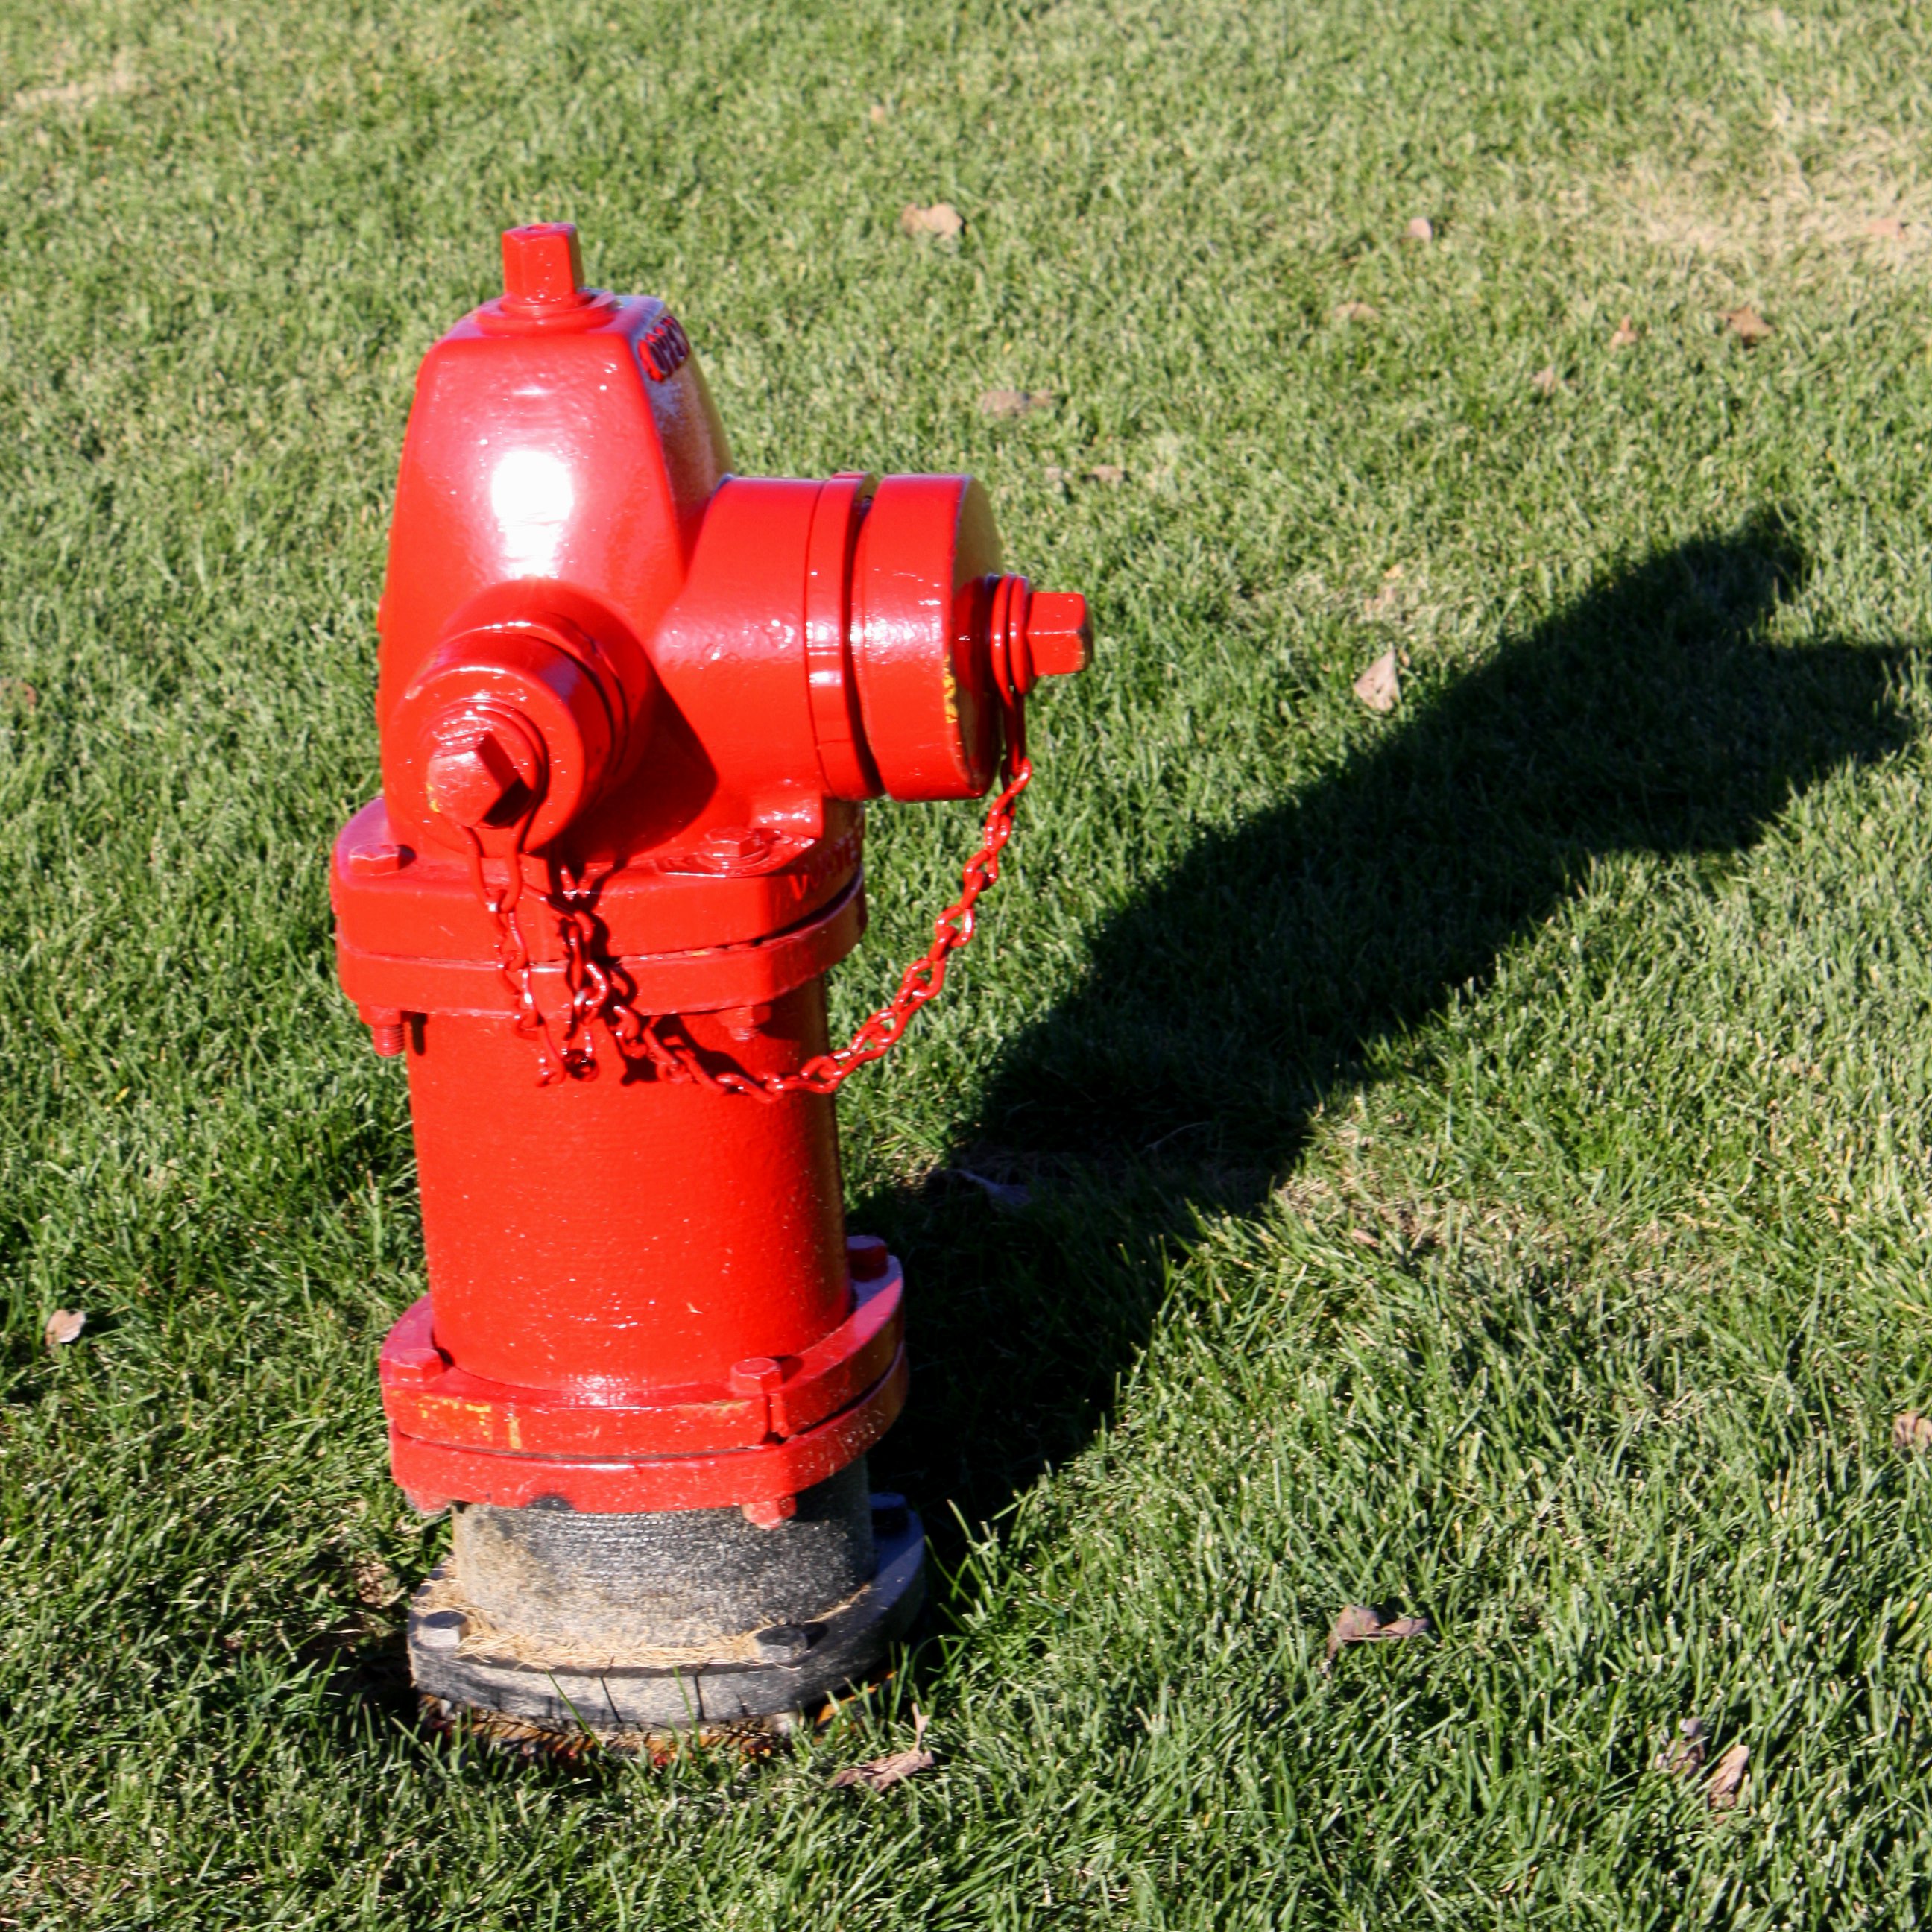 Red Fire Hydrant Picture | Free Photograph | Photos Public Domain